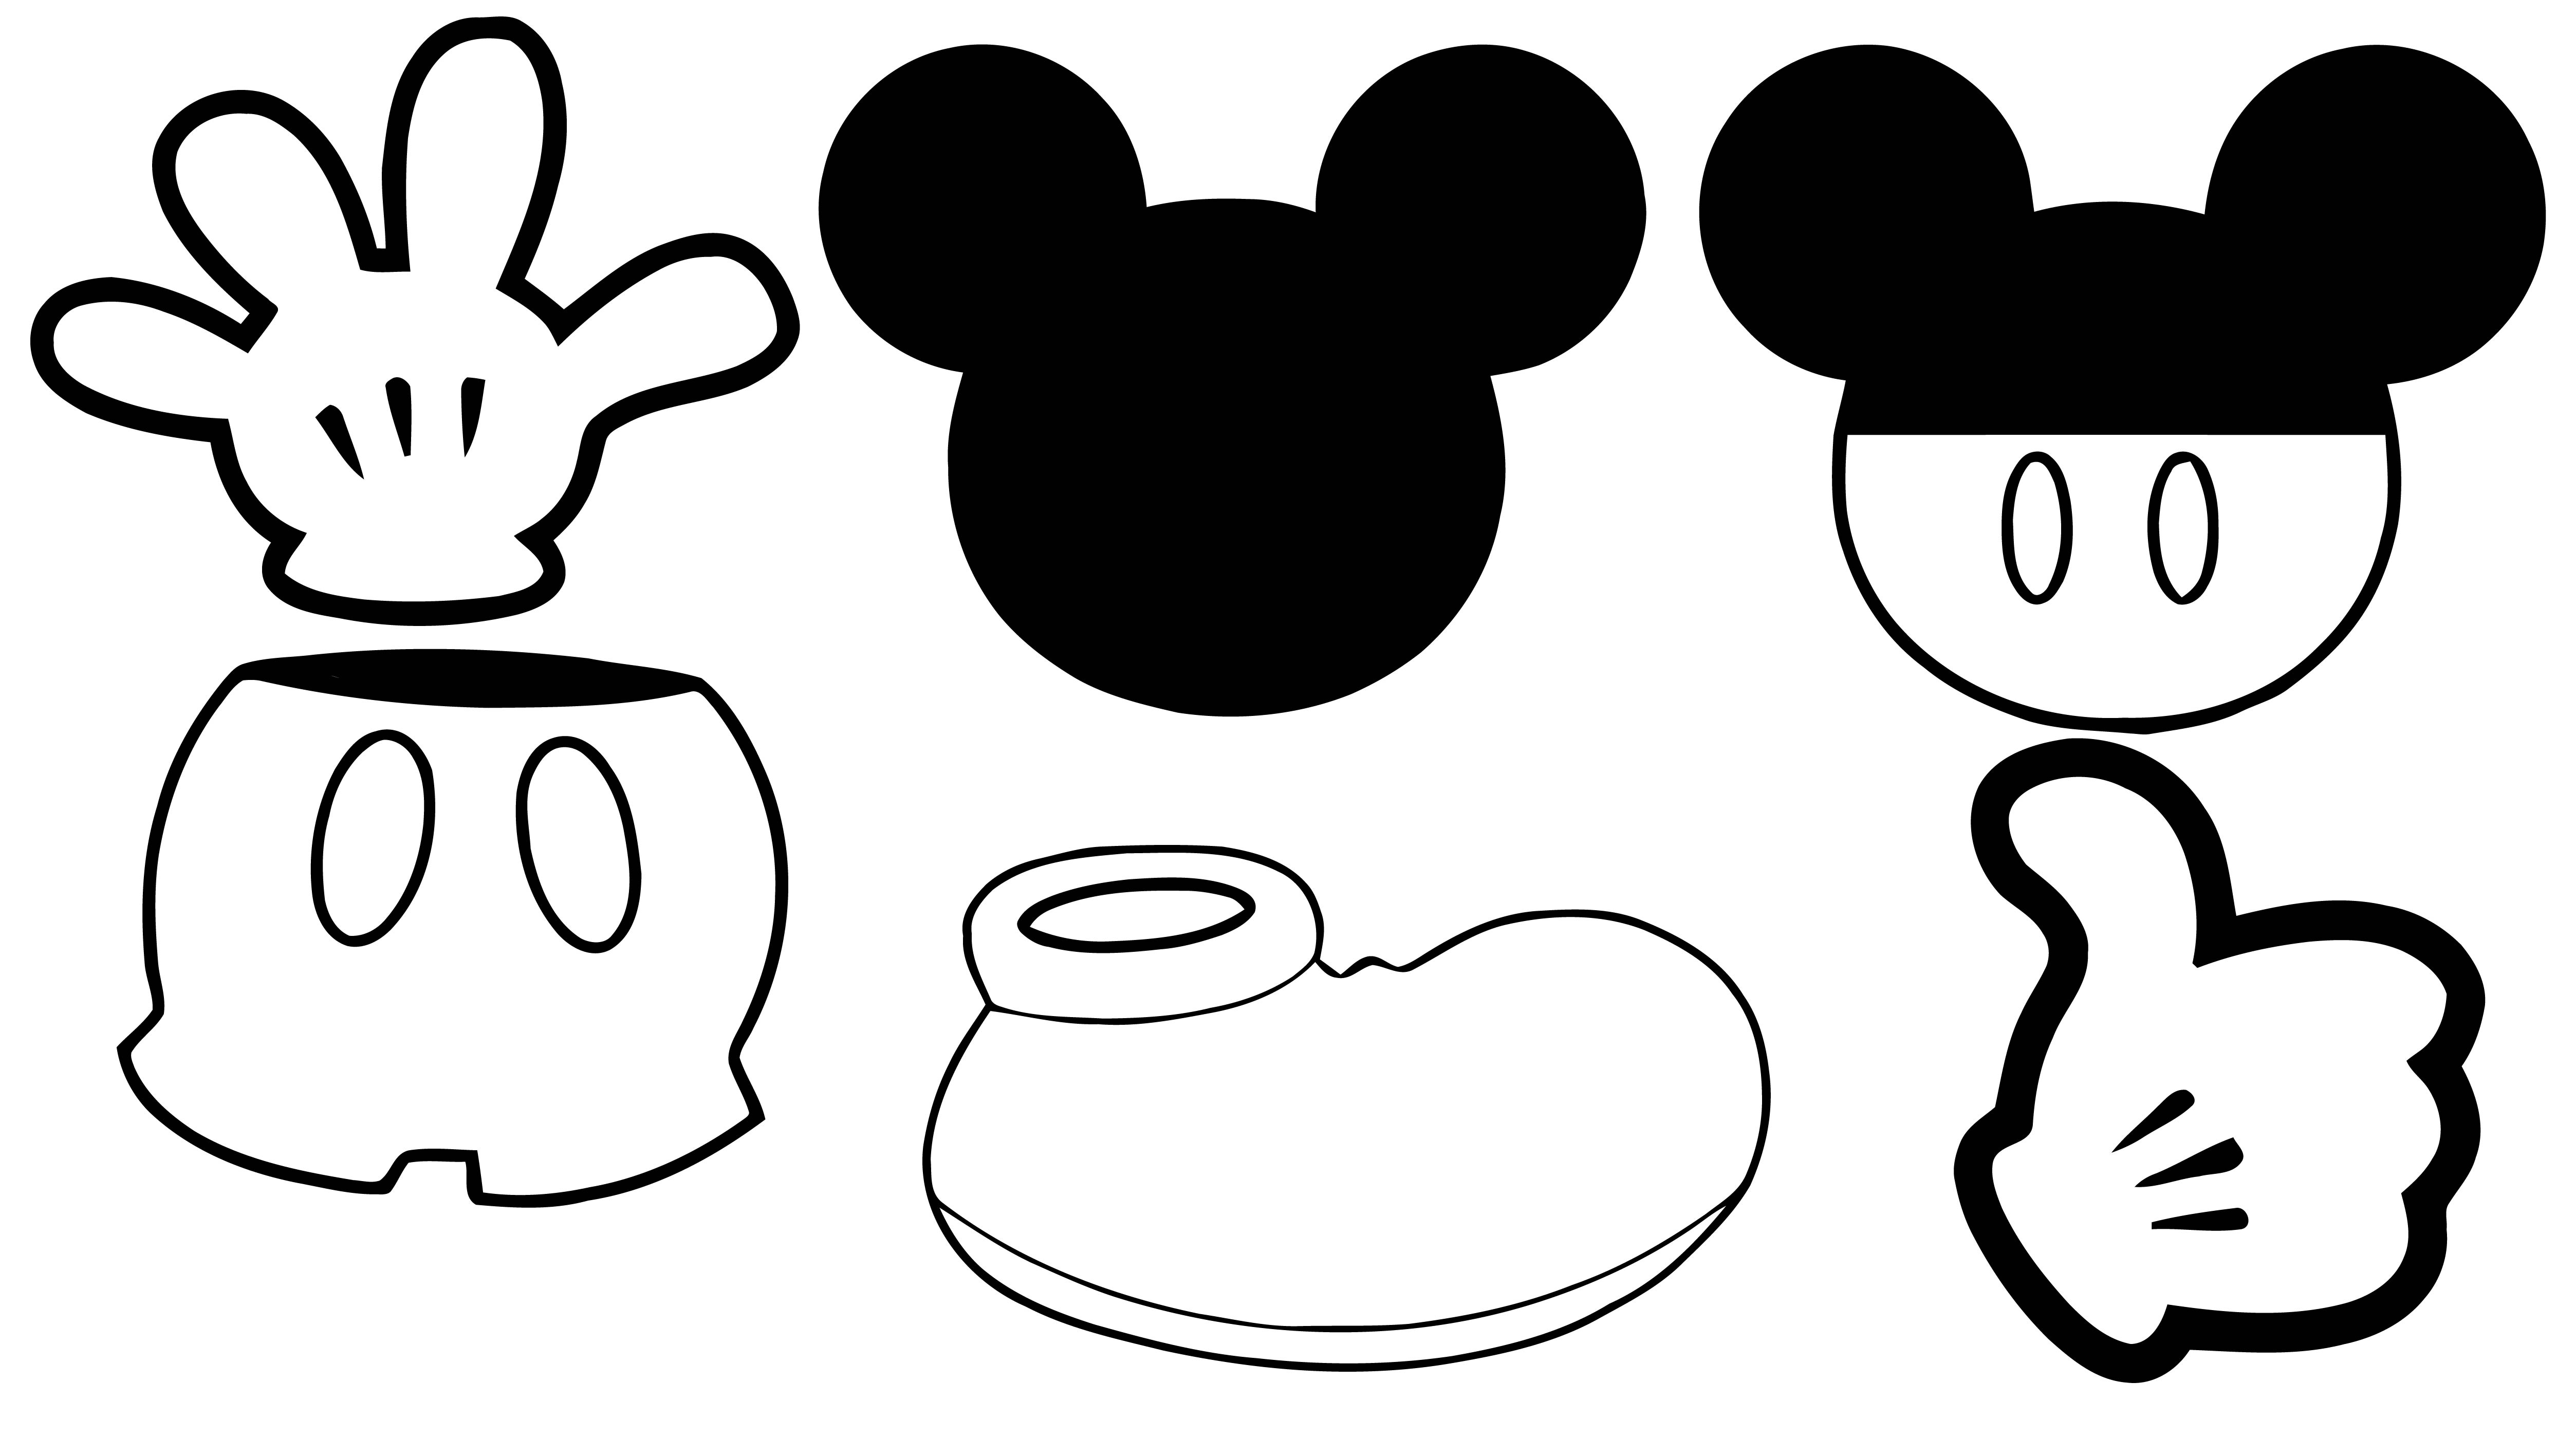 Mickey Mouse Head Clipart Minnie Mouse Head Mickey Mouse Border Panda Free Images Coloring Page